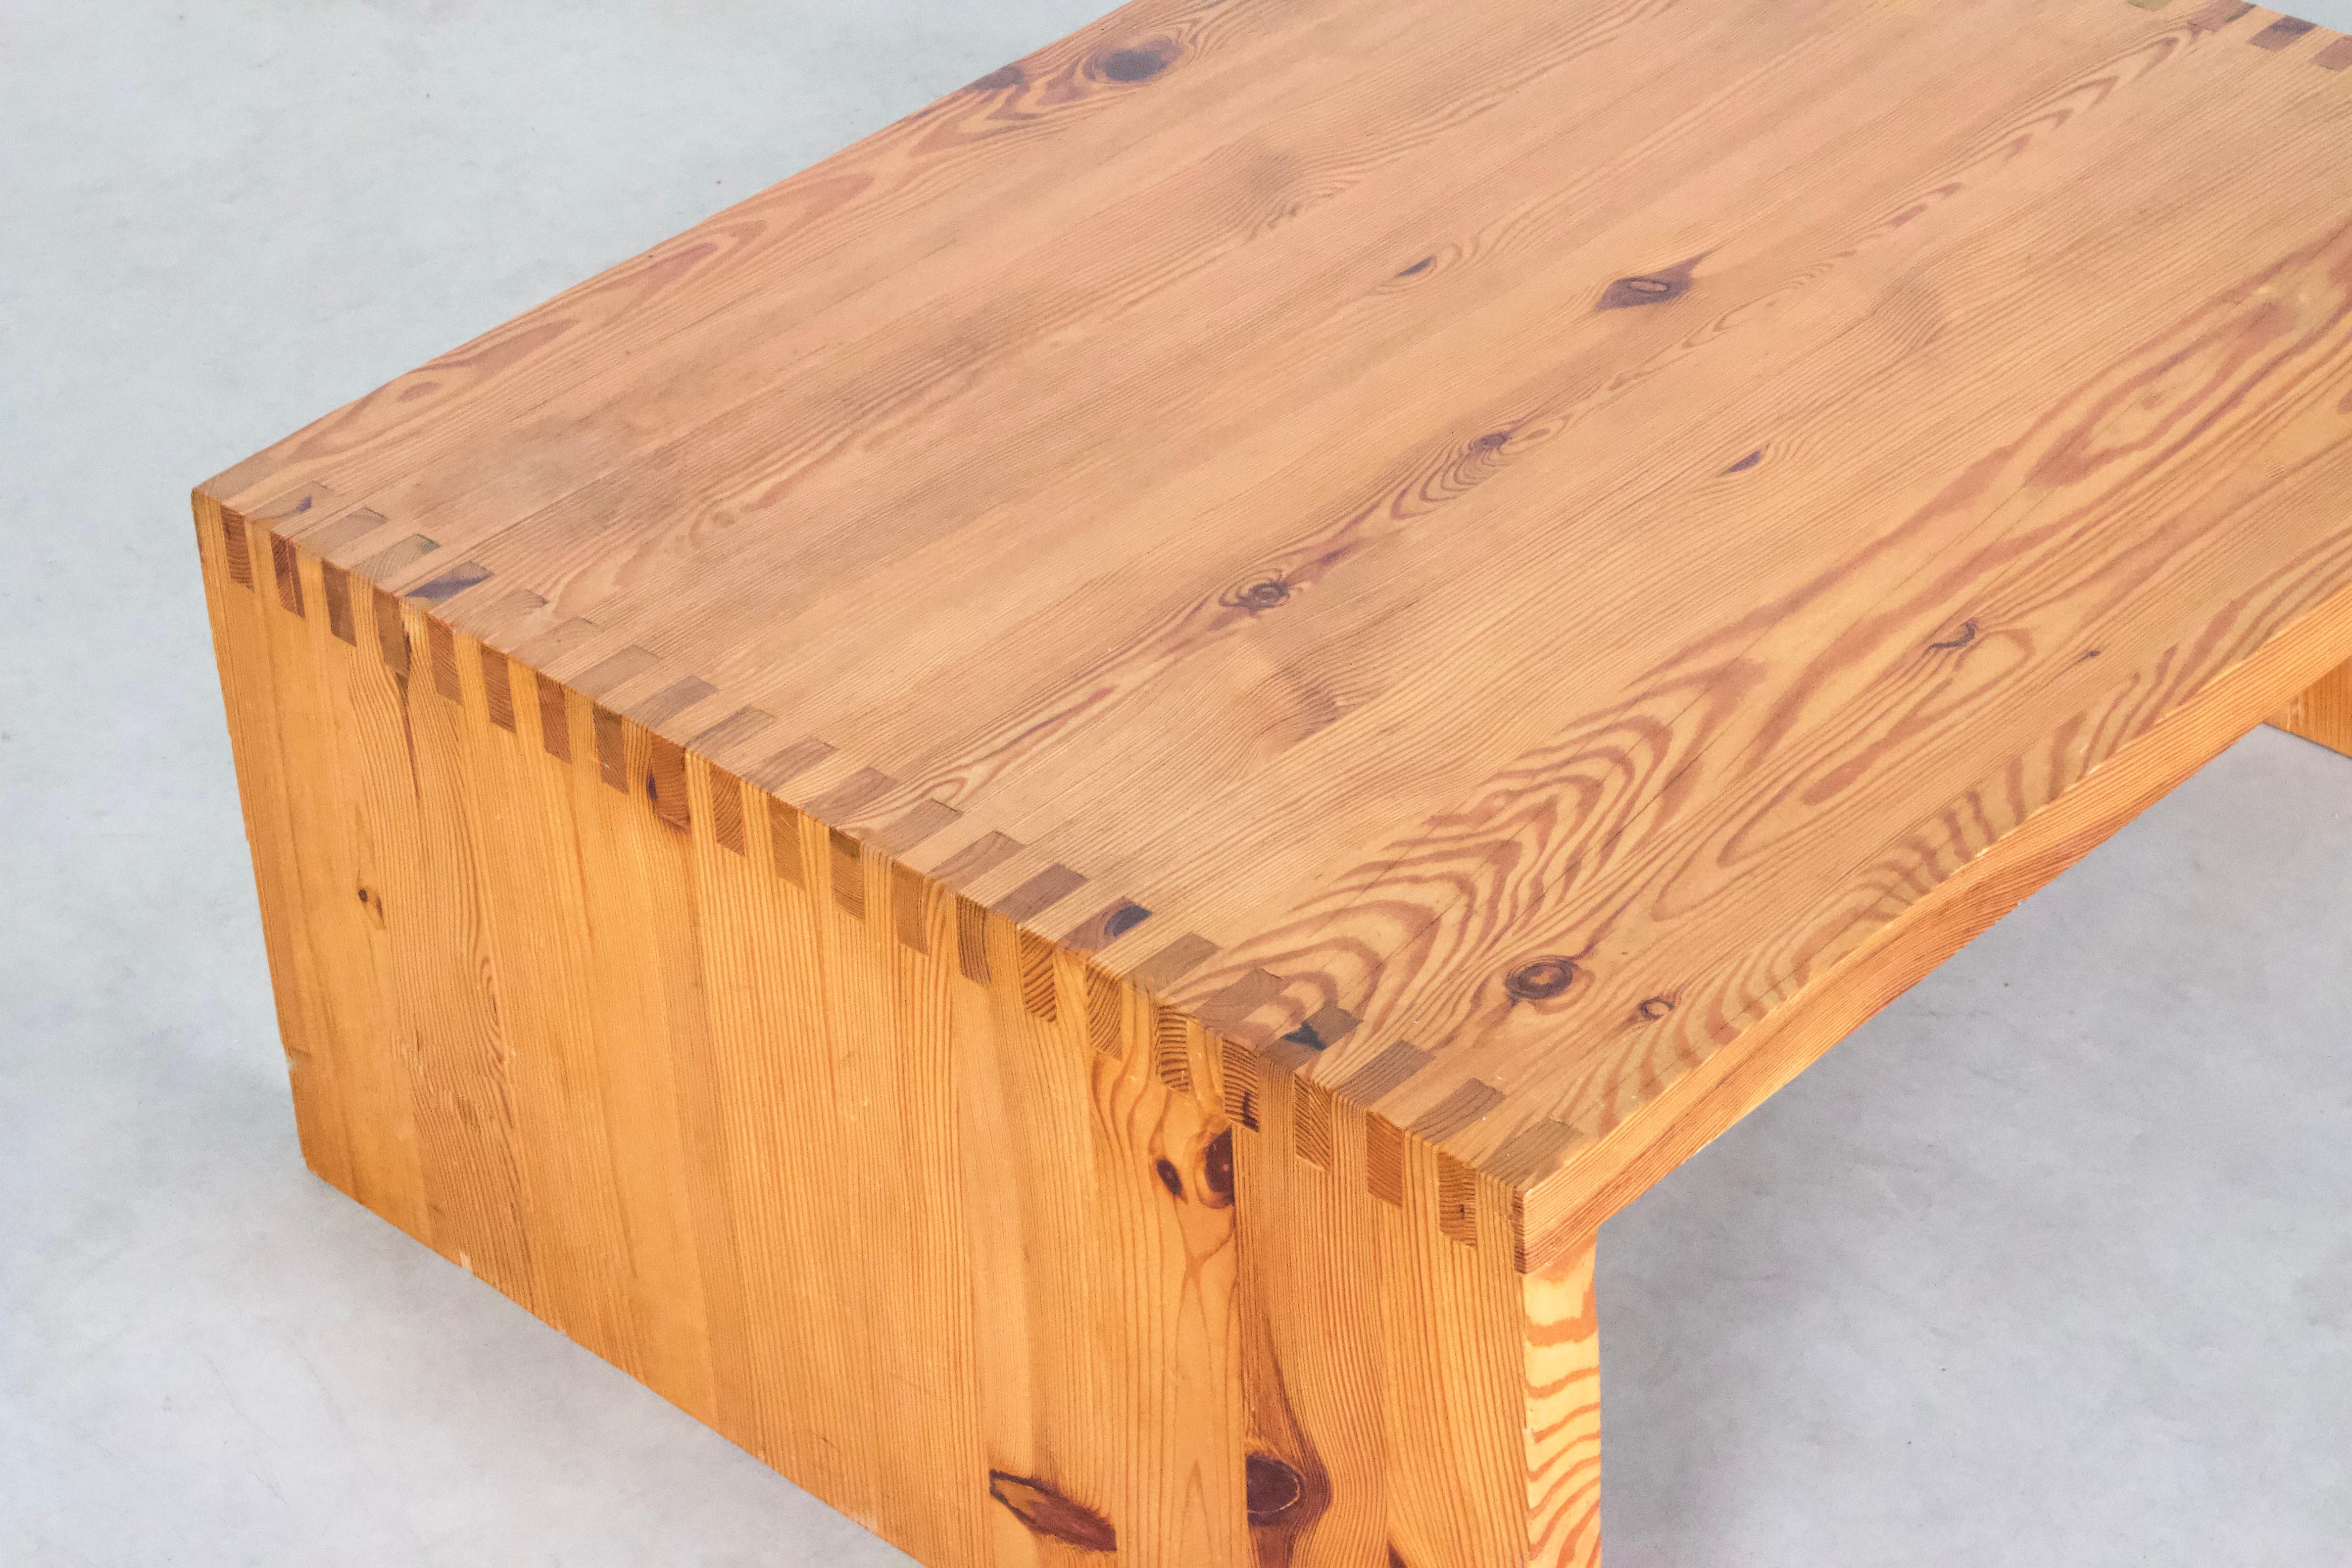 Coffee table by Ate Van Apeldoorn in good condition.

The table is manufactured in Holland by Houtwerk Hattem in the 1970s

It is made of solid pine wood which is connected by trademark joints.

The style reminds of Scandinavian modernism, like